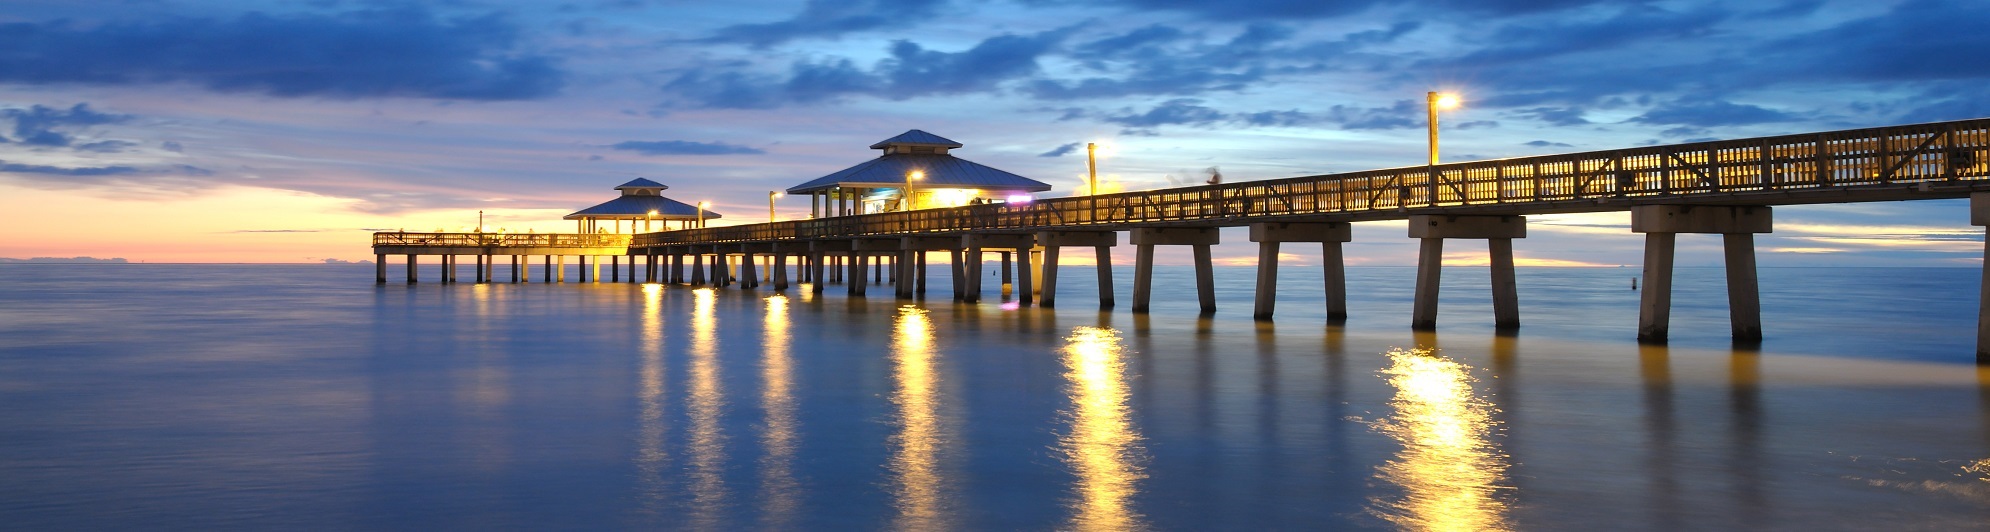 Pier at Sunset in Naples Florida USA